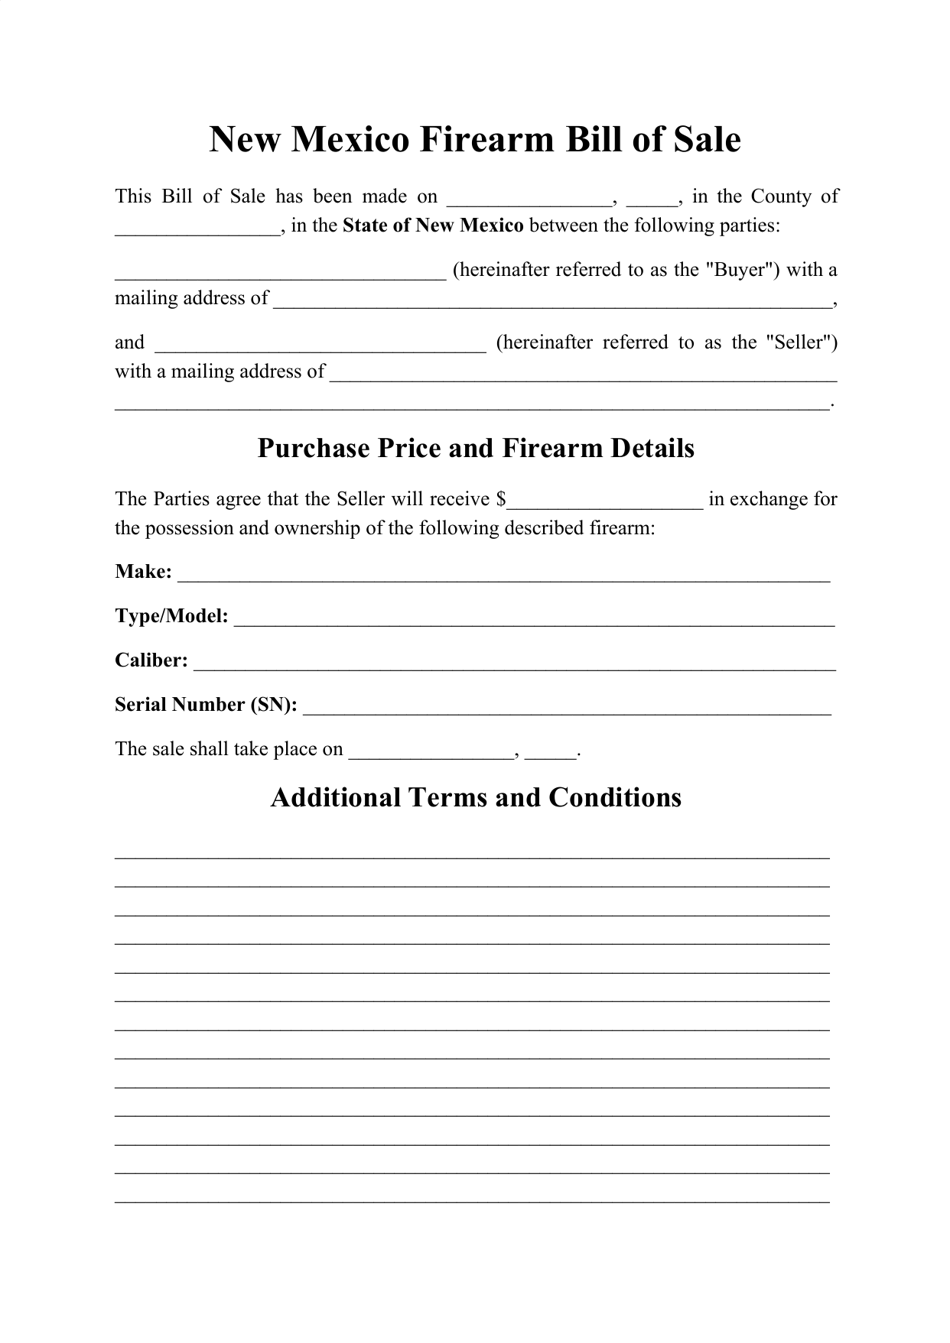 Firearm Bill of Sale Form - New Mexico, Page 1